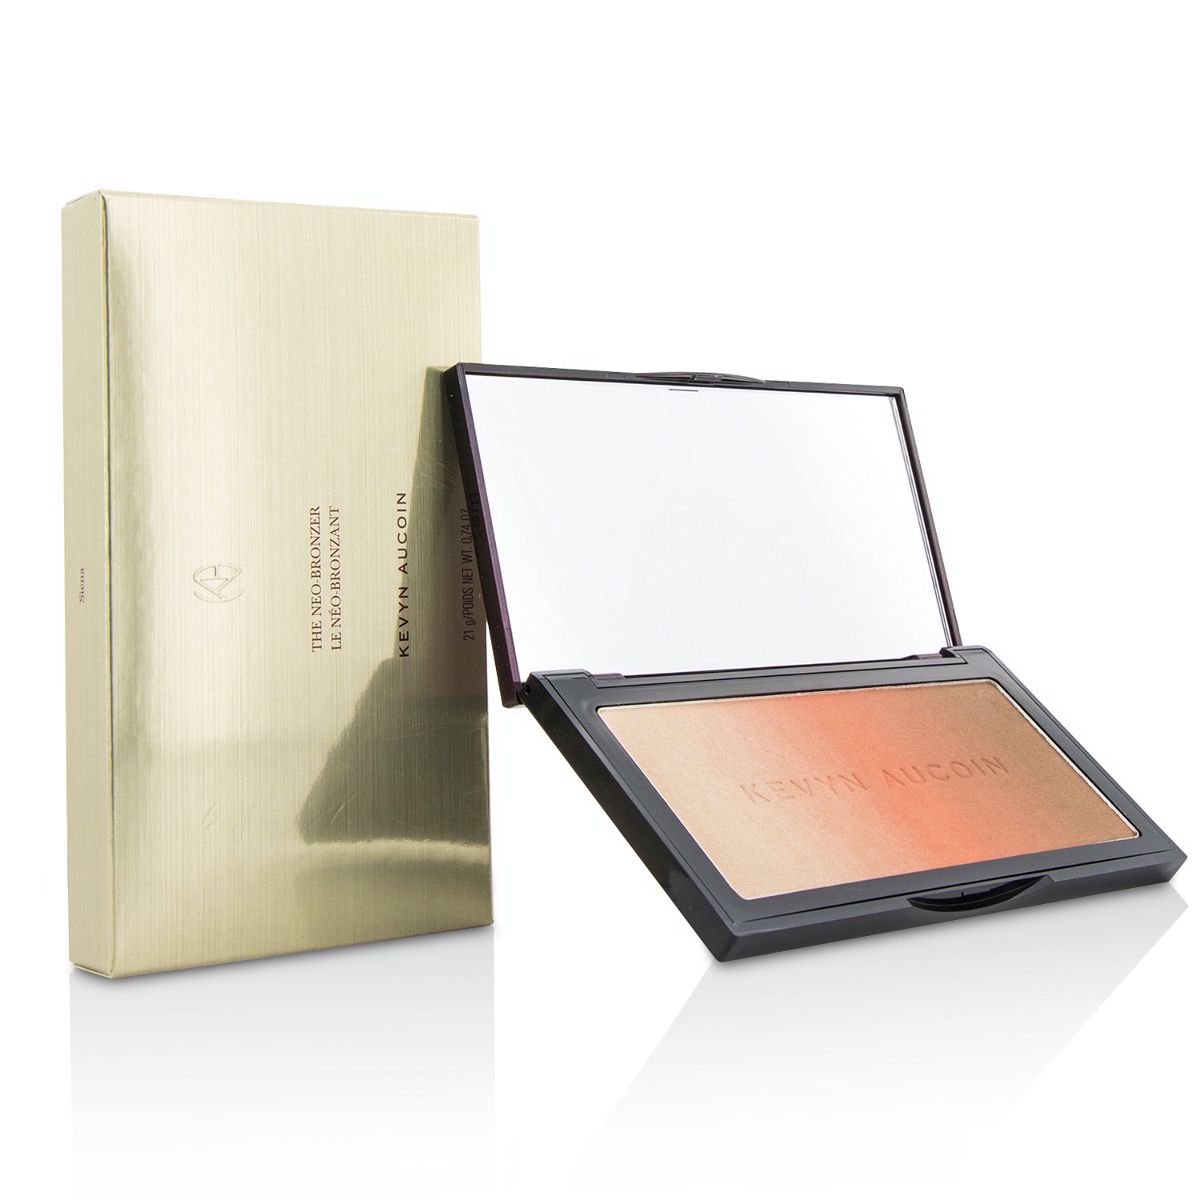 The Neo Bronzer - Siena (Warm Coral) Kevyn Aucoin Image